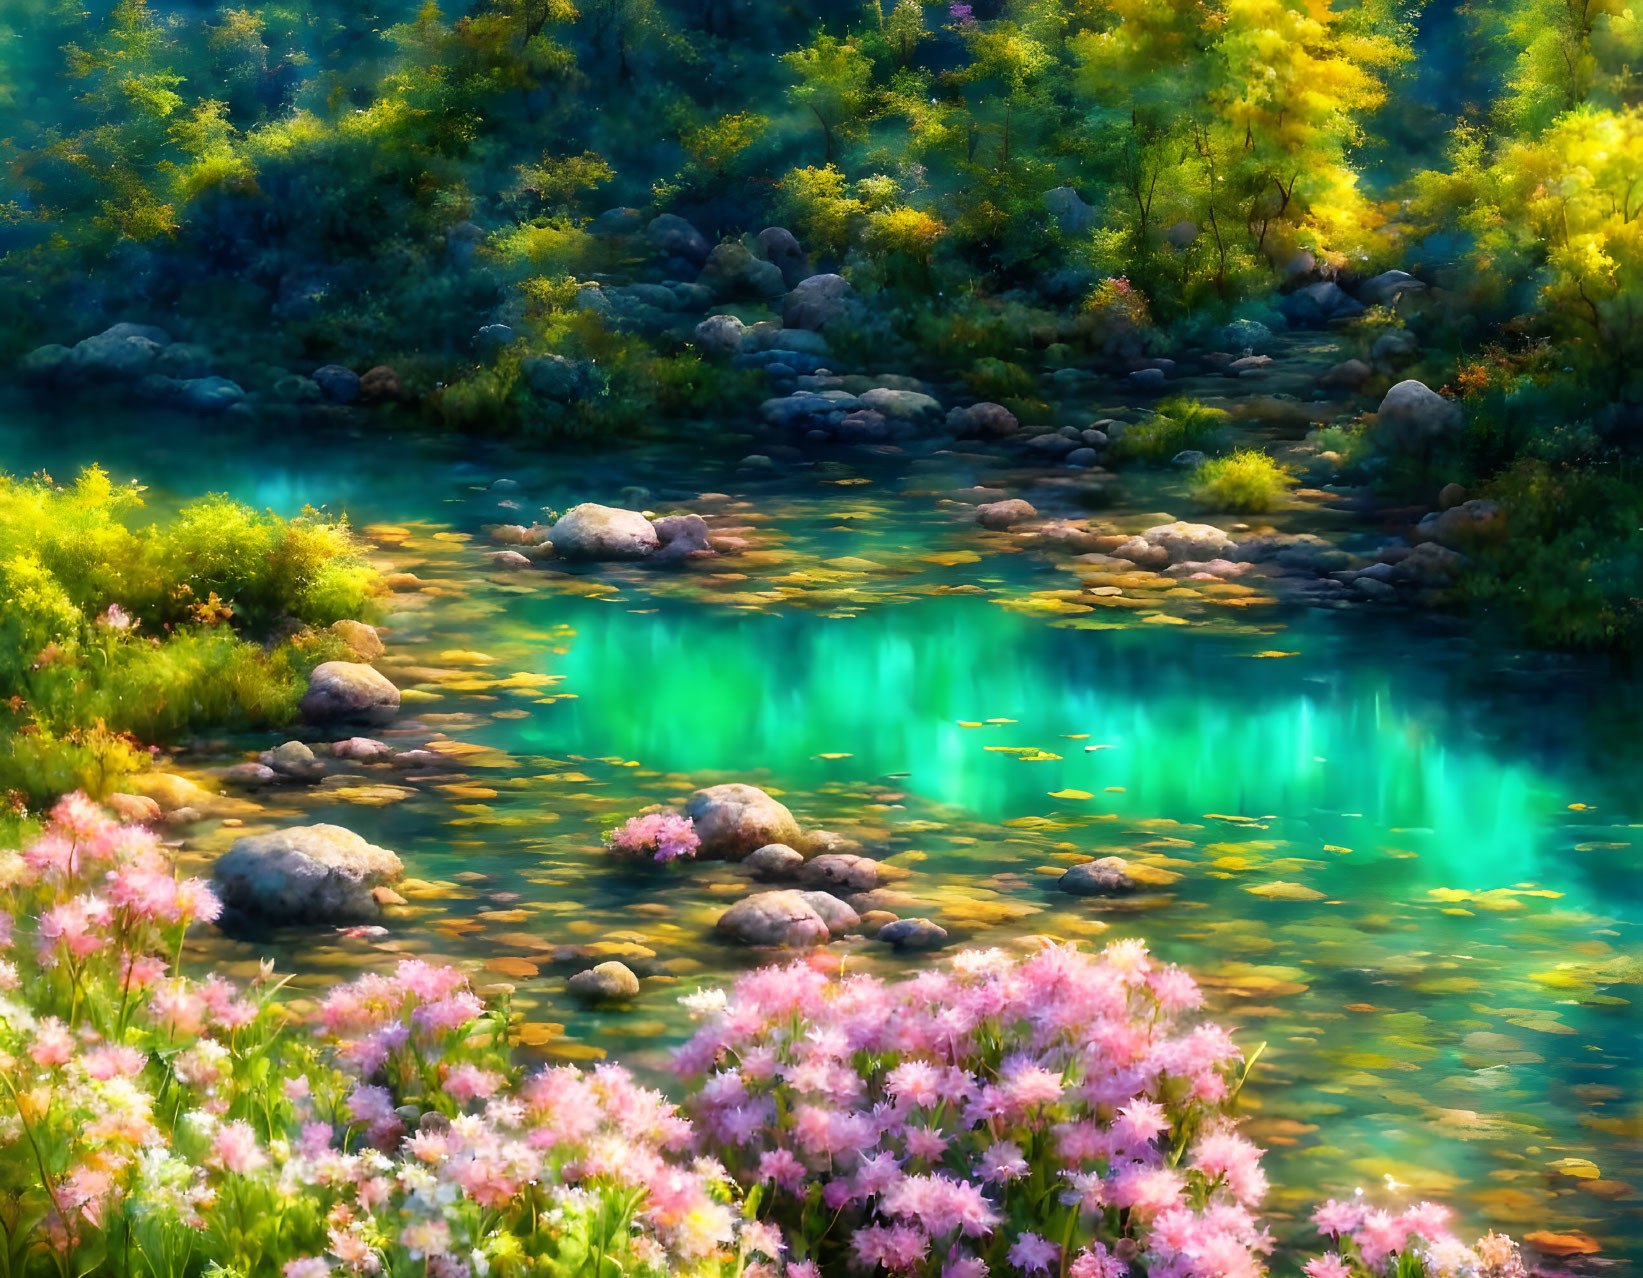 Tranquil river with turquoise water in vibrant landscape blooming with pink flowers